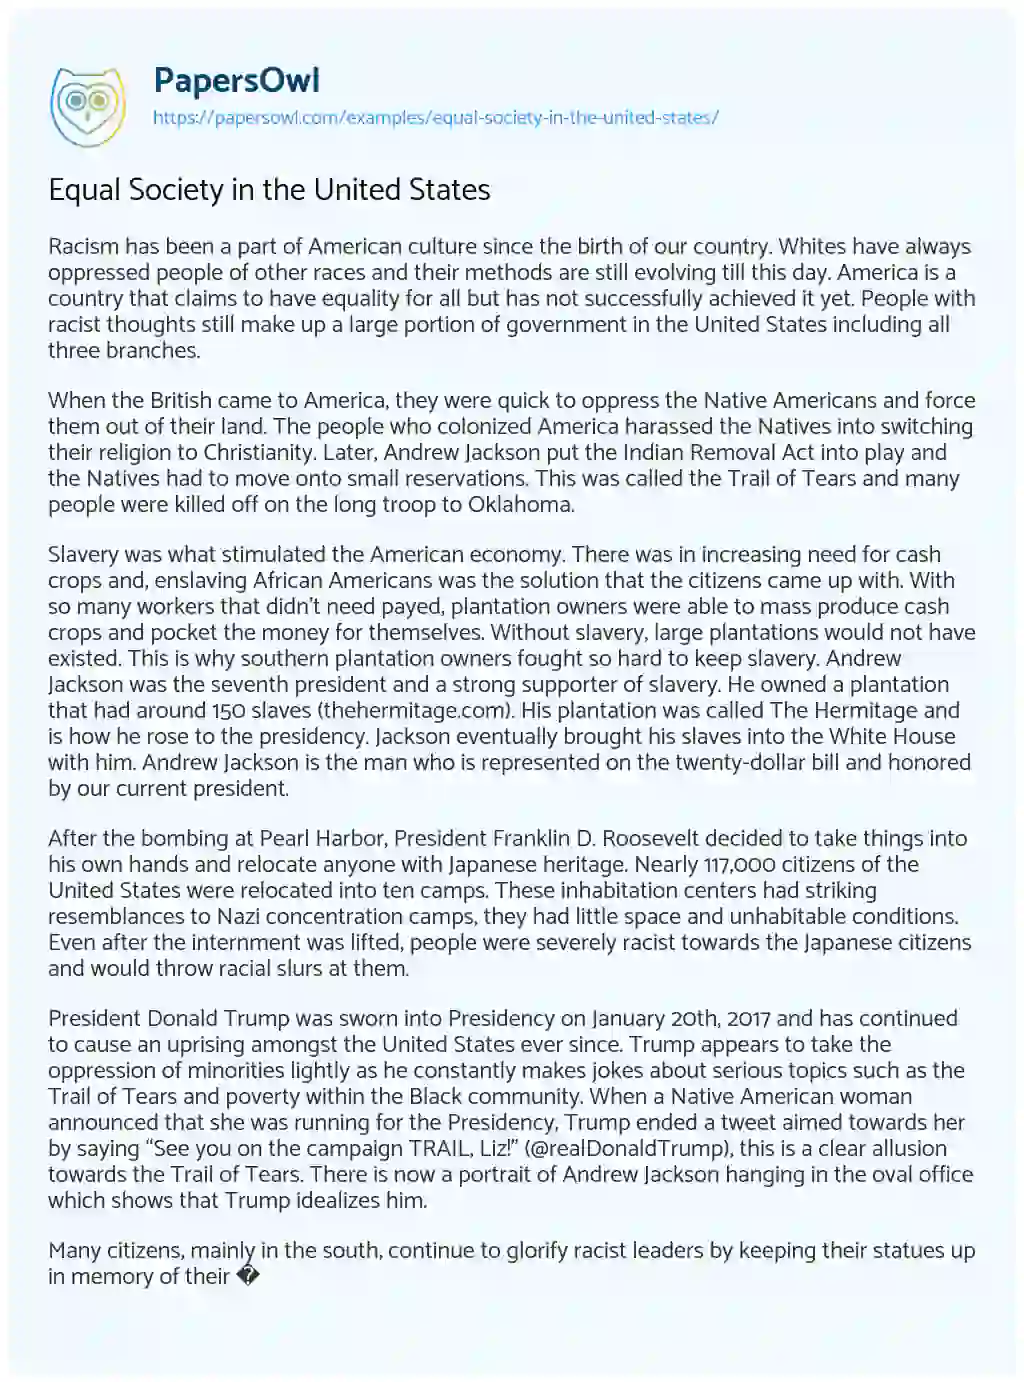 Essay on Equal Society in the United States